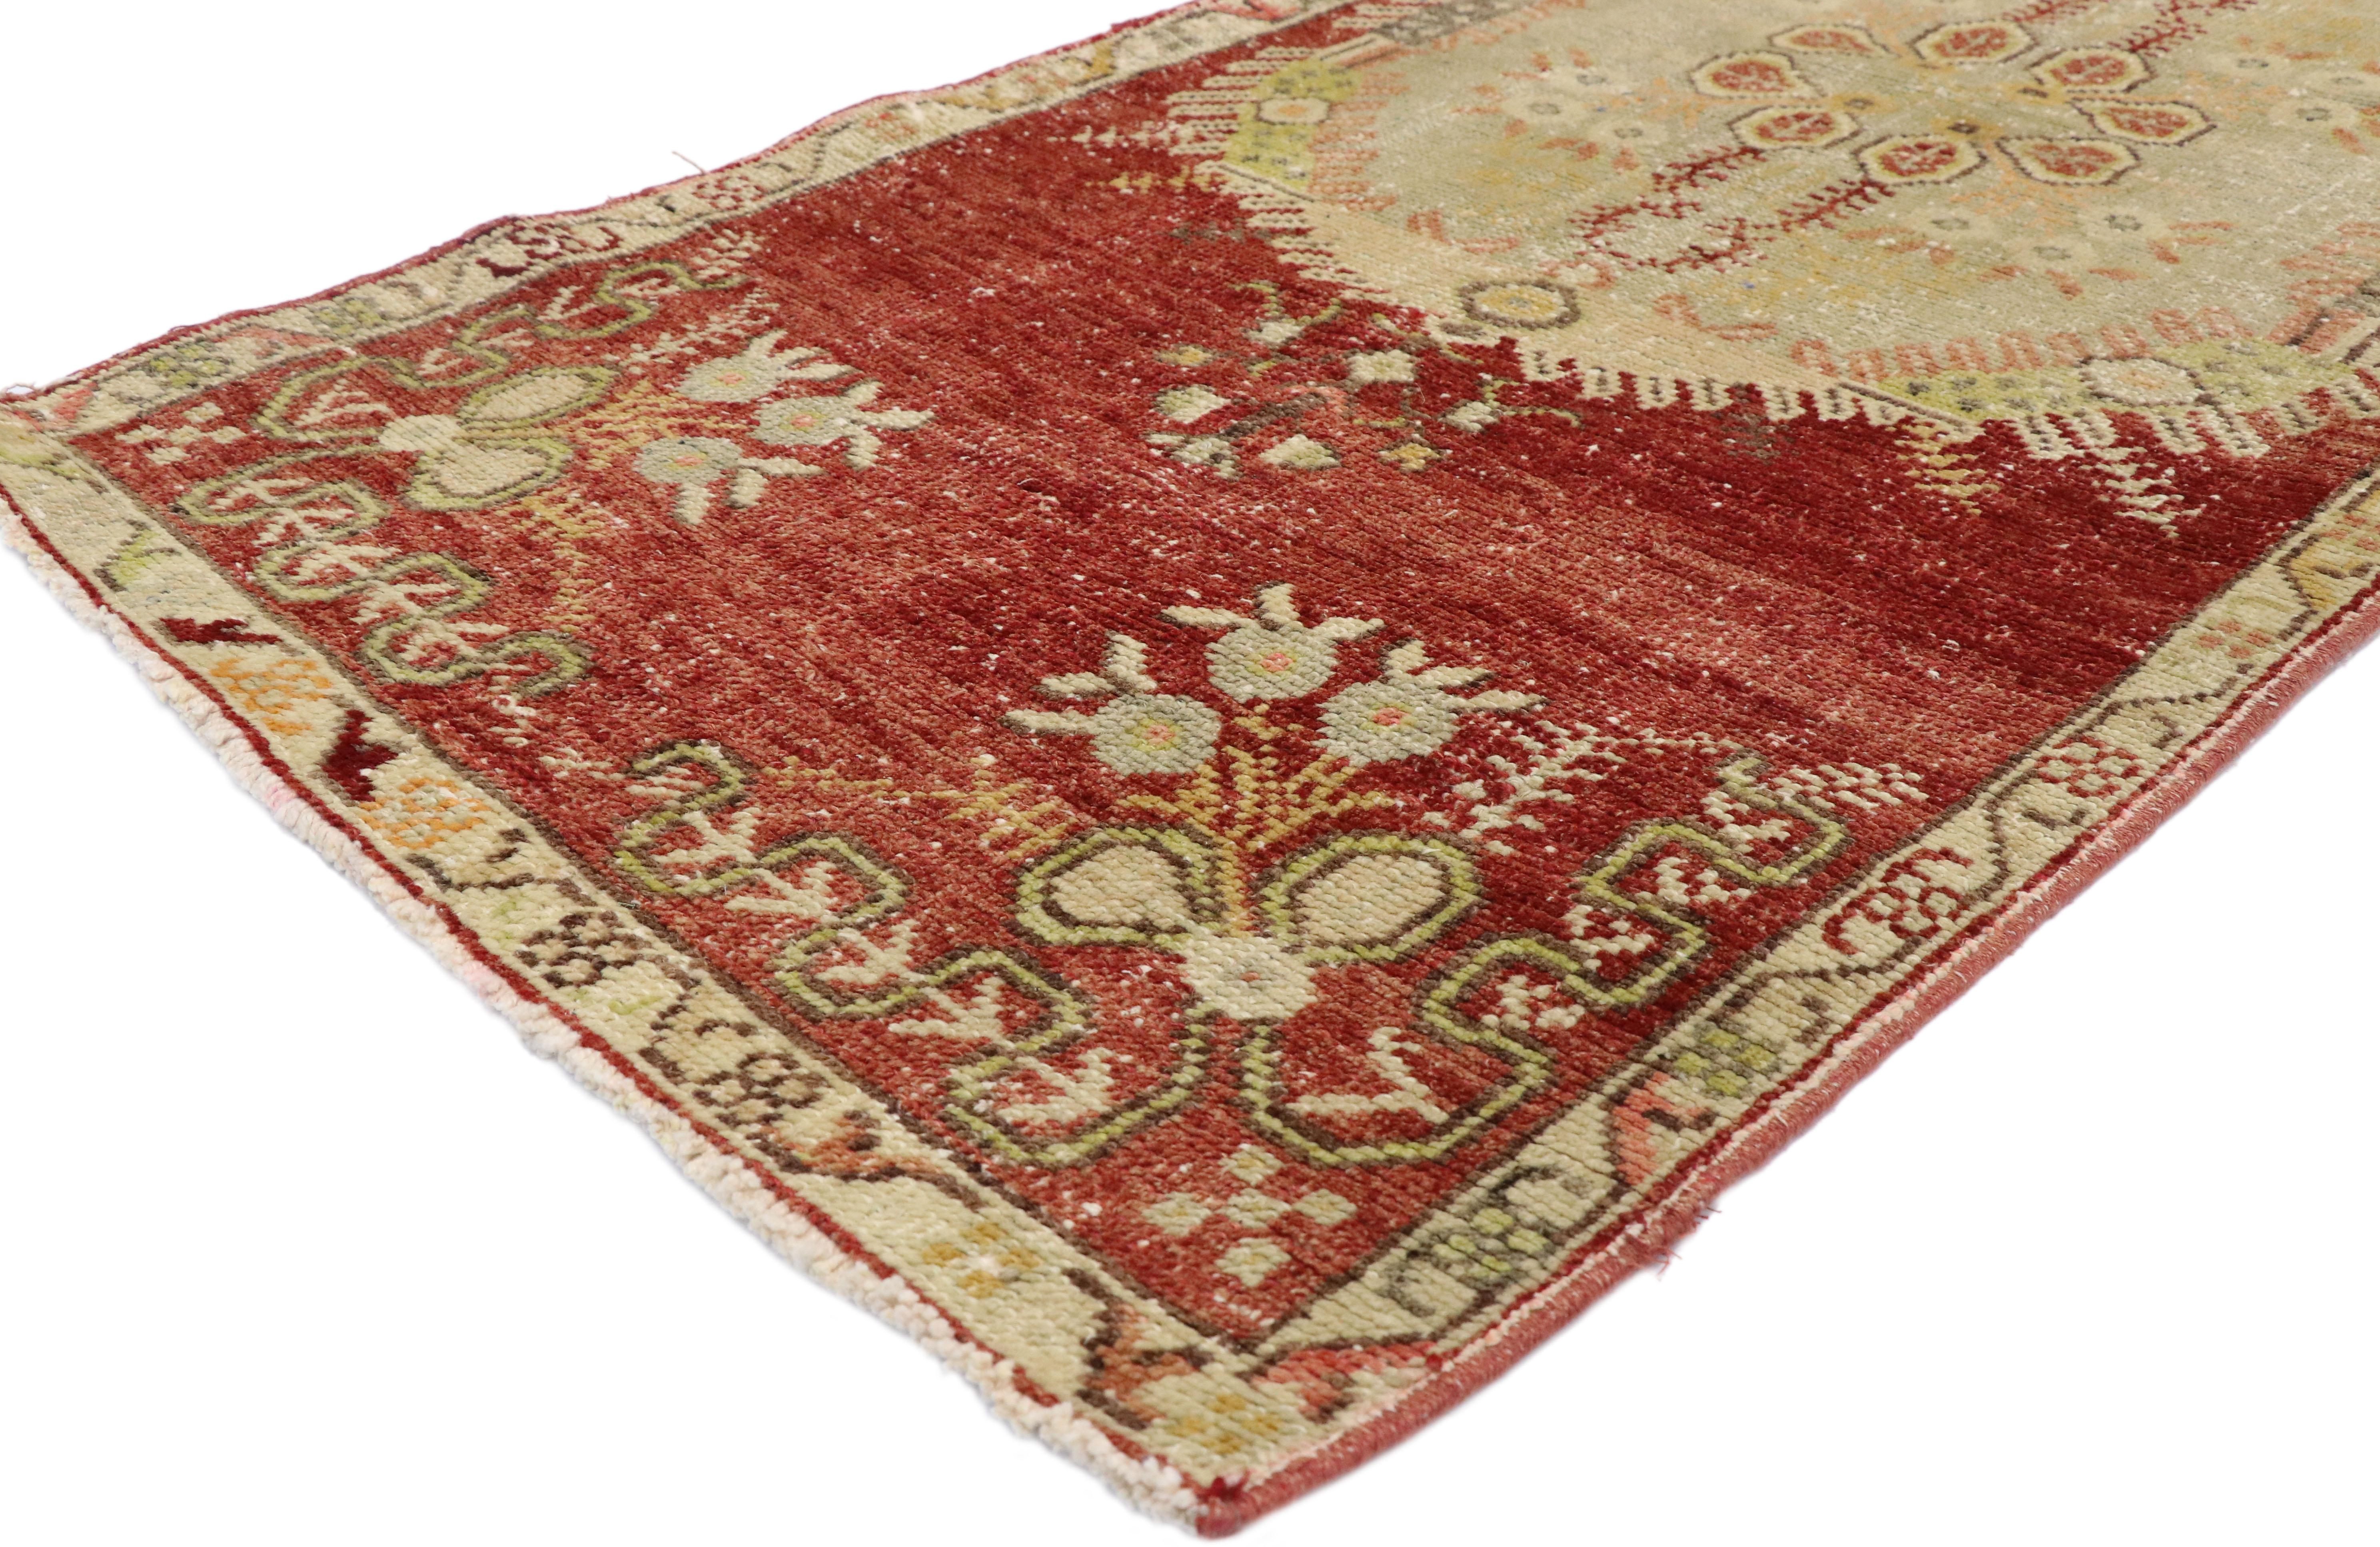 51726 Distressed Vintage Turkish Oushak Runner with French Provincial and Rococo Style. French Provincial and Rococo romanticism meets timeless Anatolian tradition in this Classic style in this hand knotted wool distressed vintage Turkish Oushak